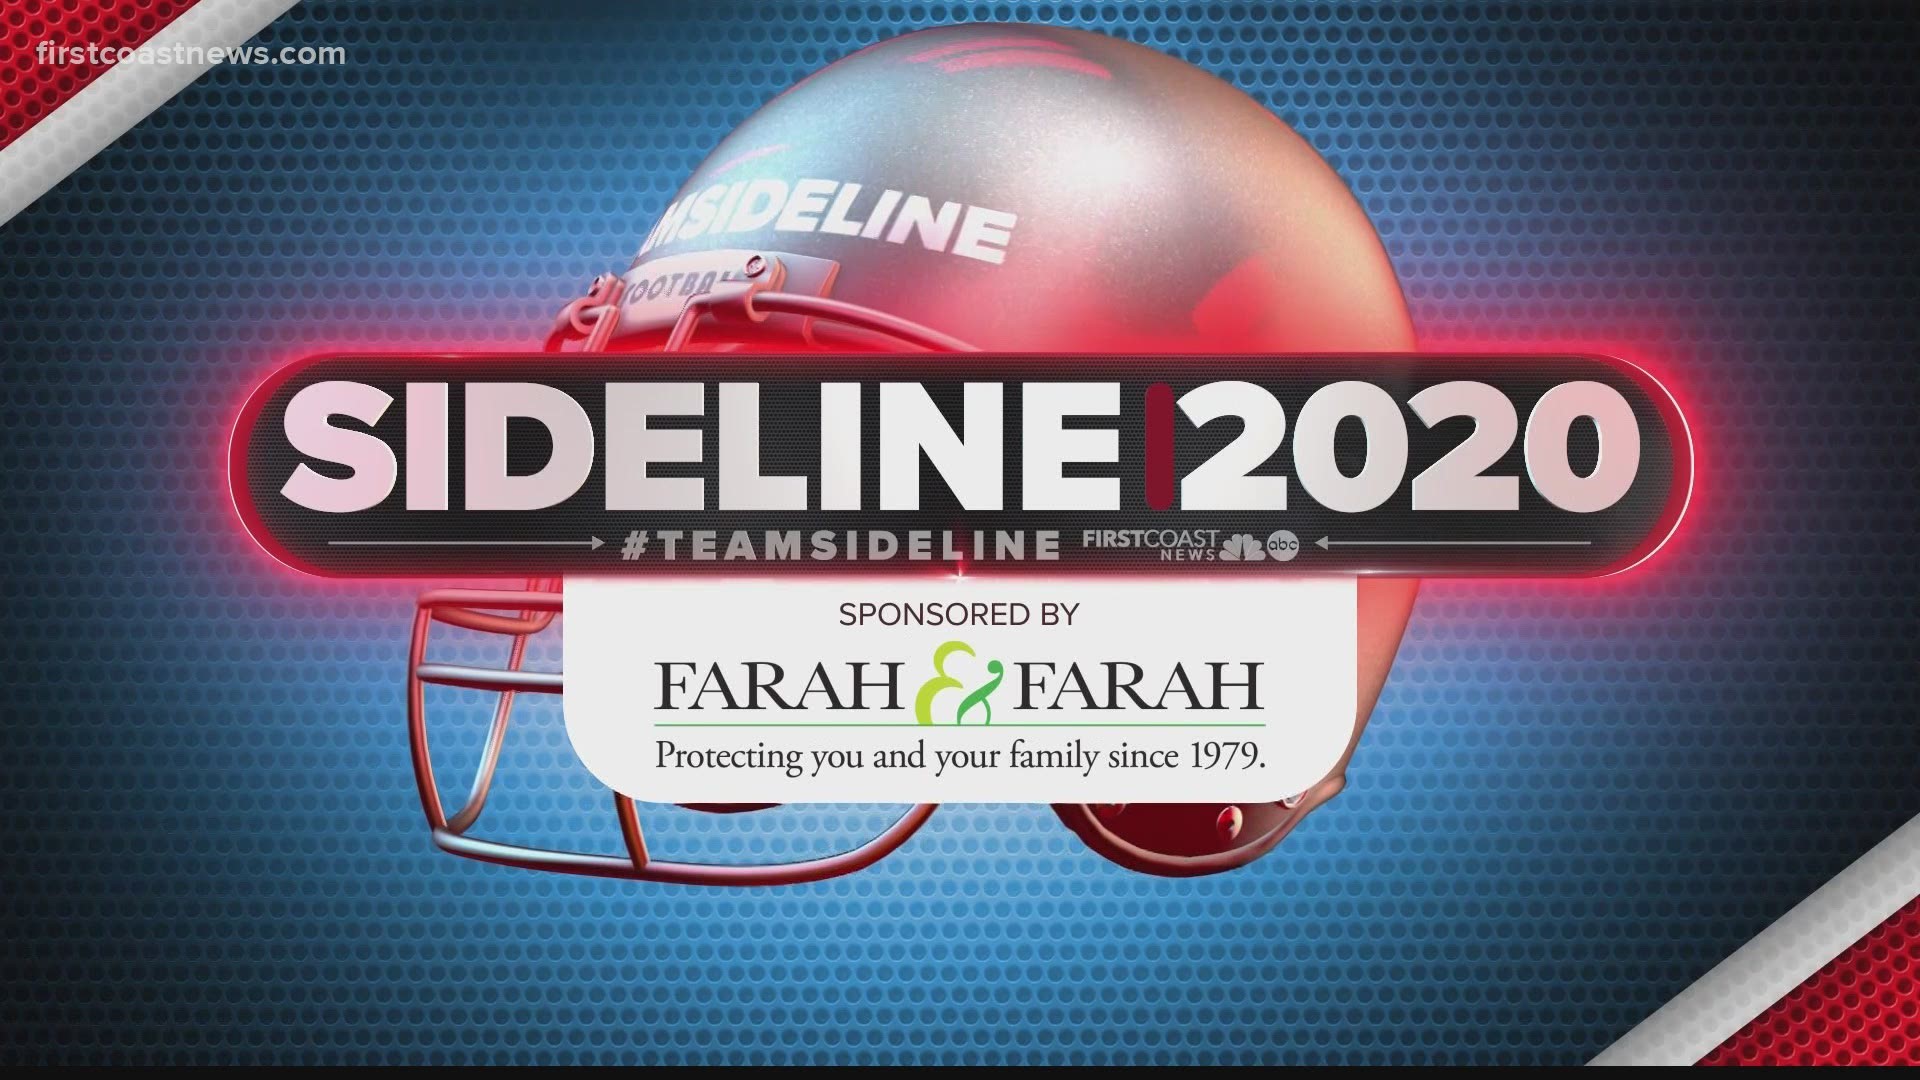 Highlights and reaction from week 2 of Sideline 2020